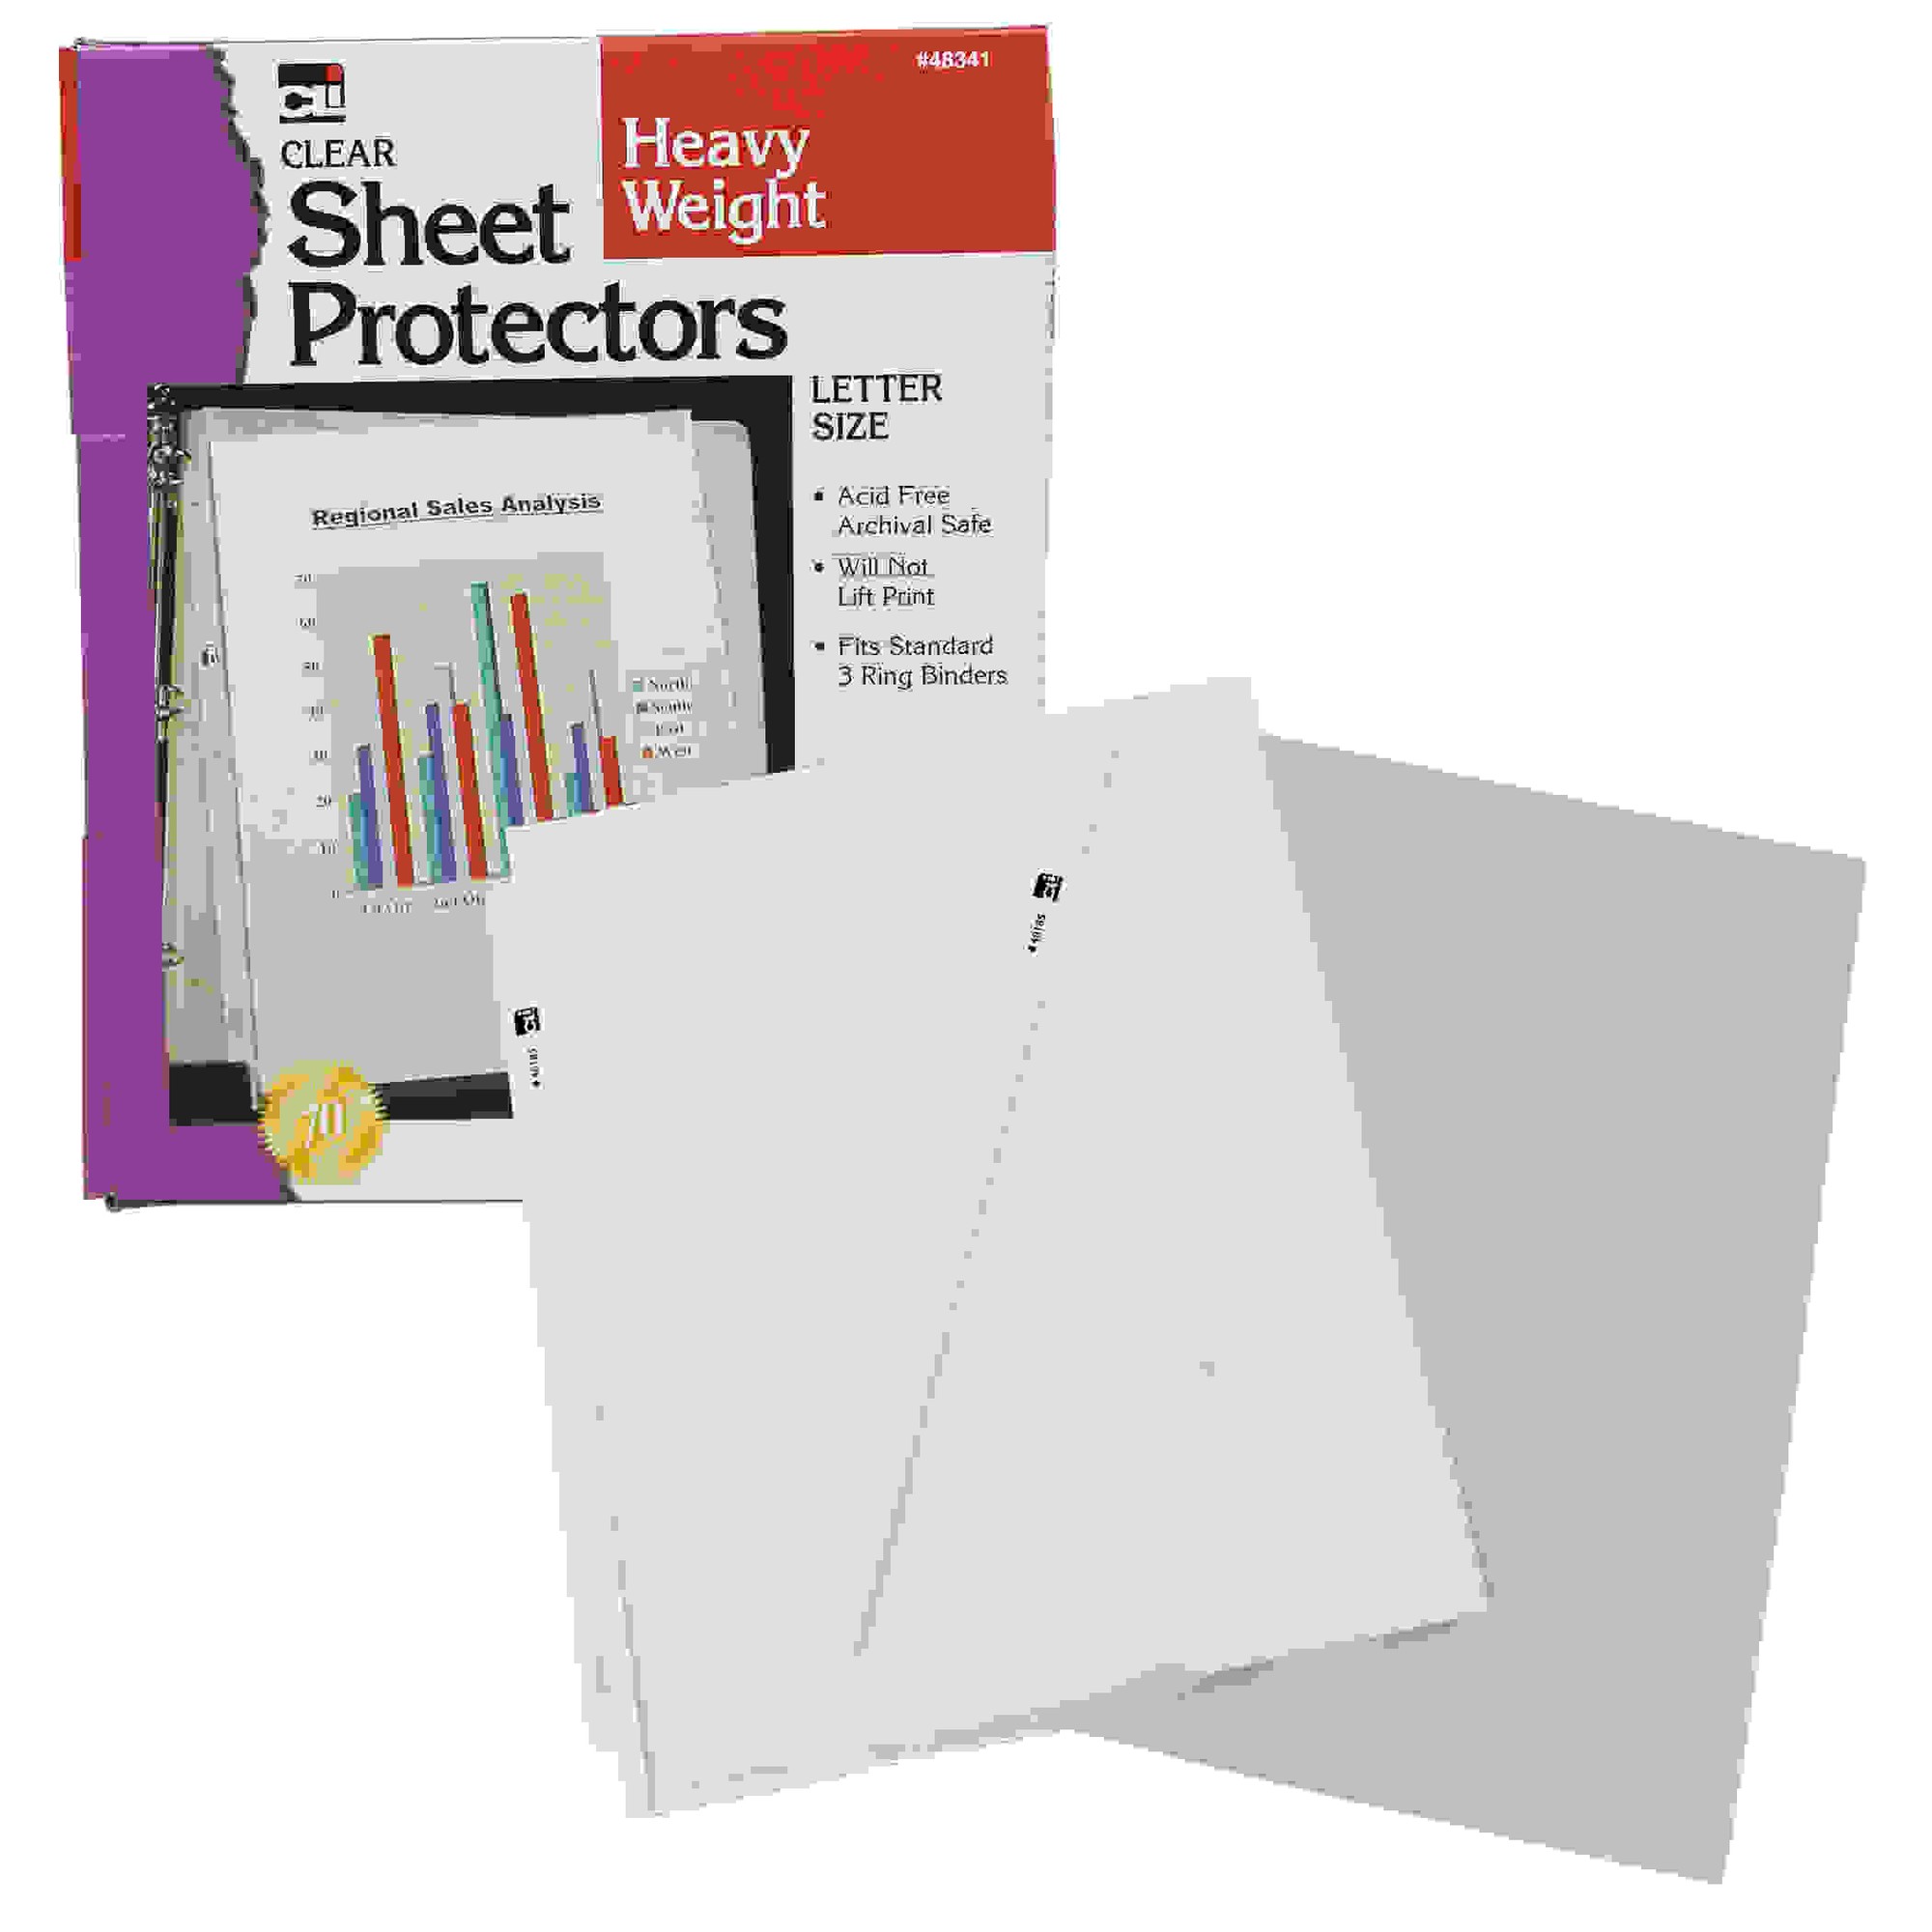 Sheet Protectors, Heavy Weight, Letter Size, Clear, Box of 100